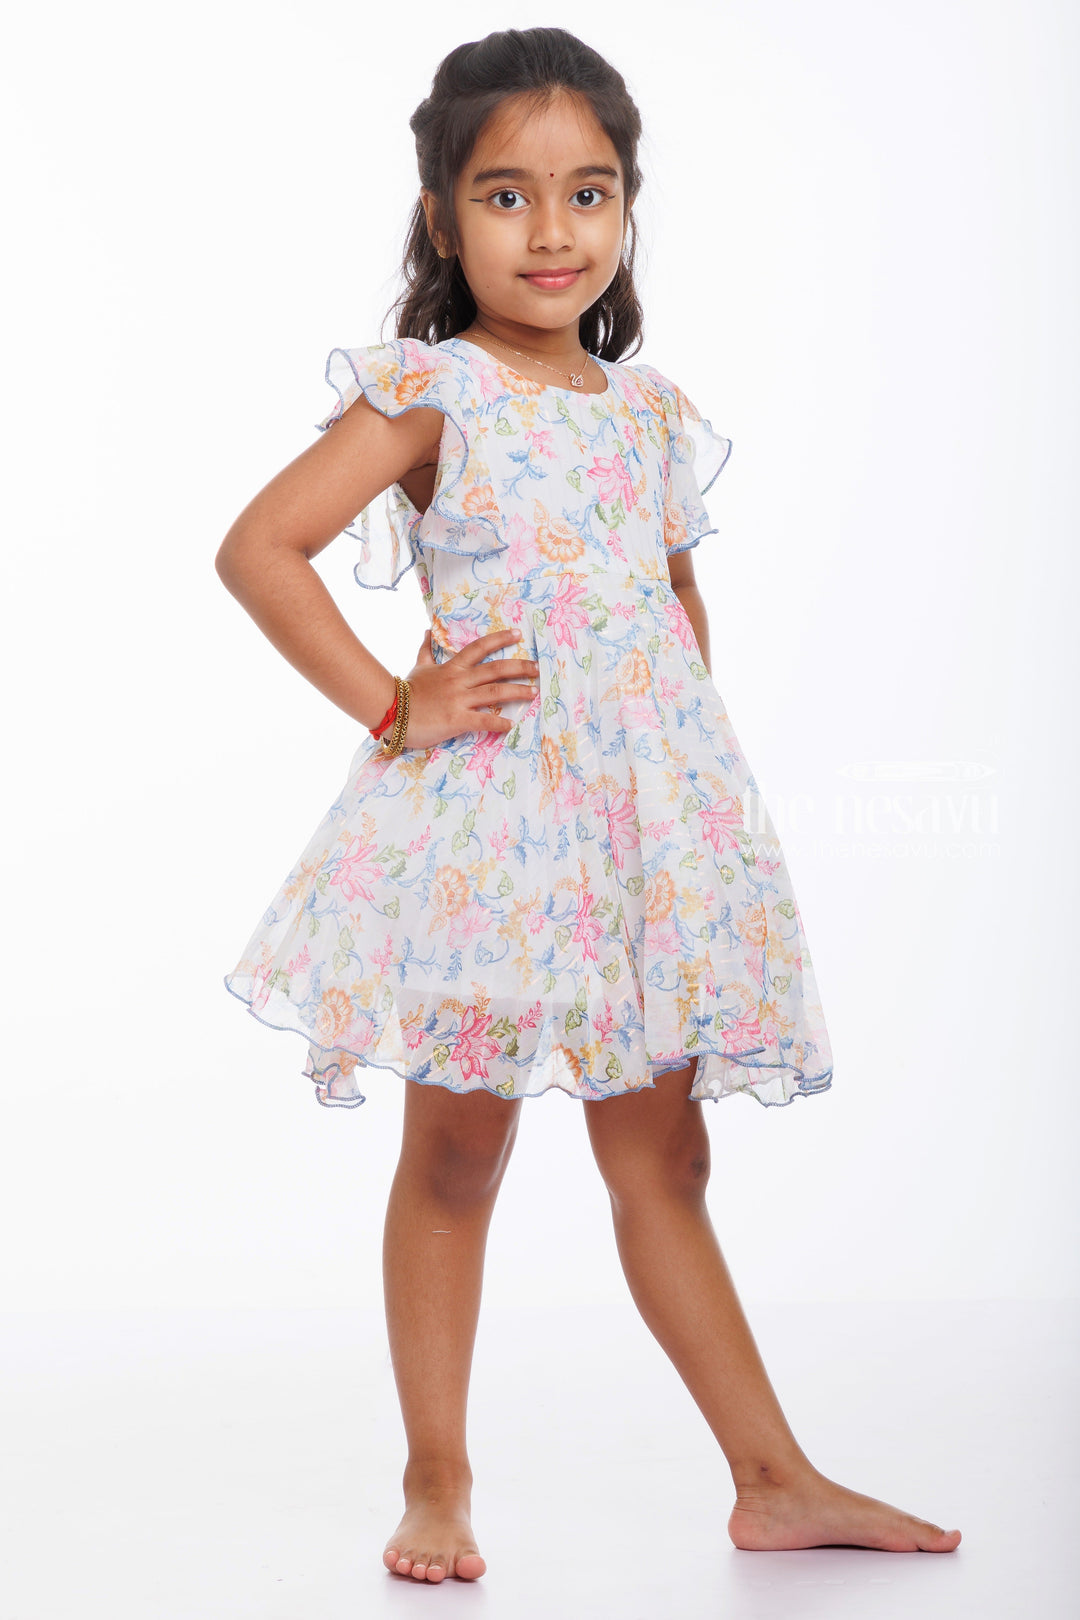 The Nesavu Baby Fancy Frock Baby Girl's Angelic Floral Frock with Flutter Sleeves Nesavu 16 (1Y) / Pink / Georgette BFJ540B-16 Charming Floral Dress for Baby Girls | Perfect for Celebrations and Play | The Nesavu